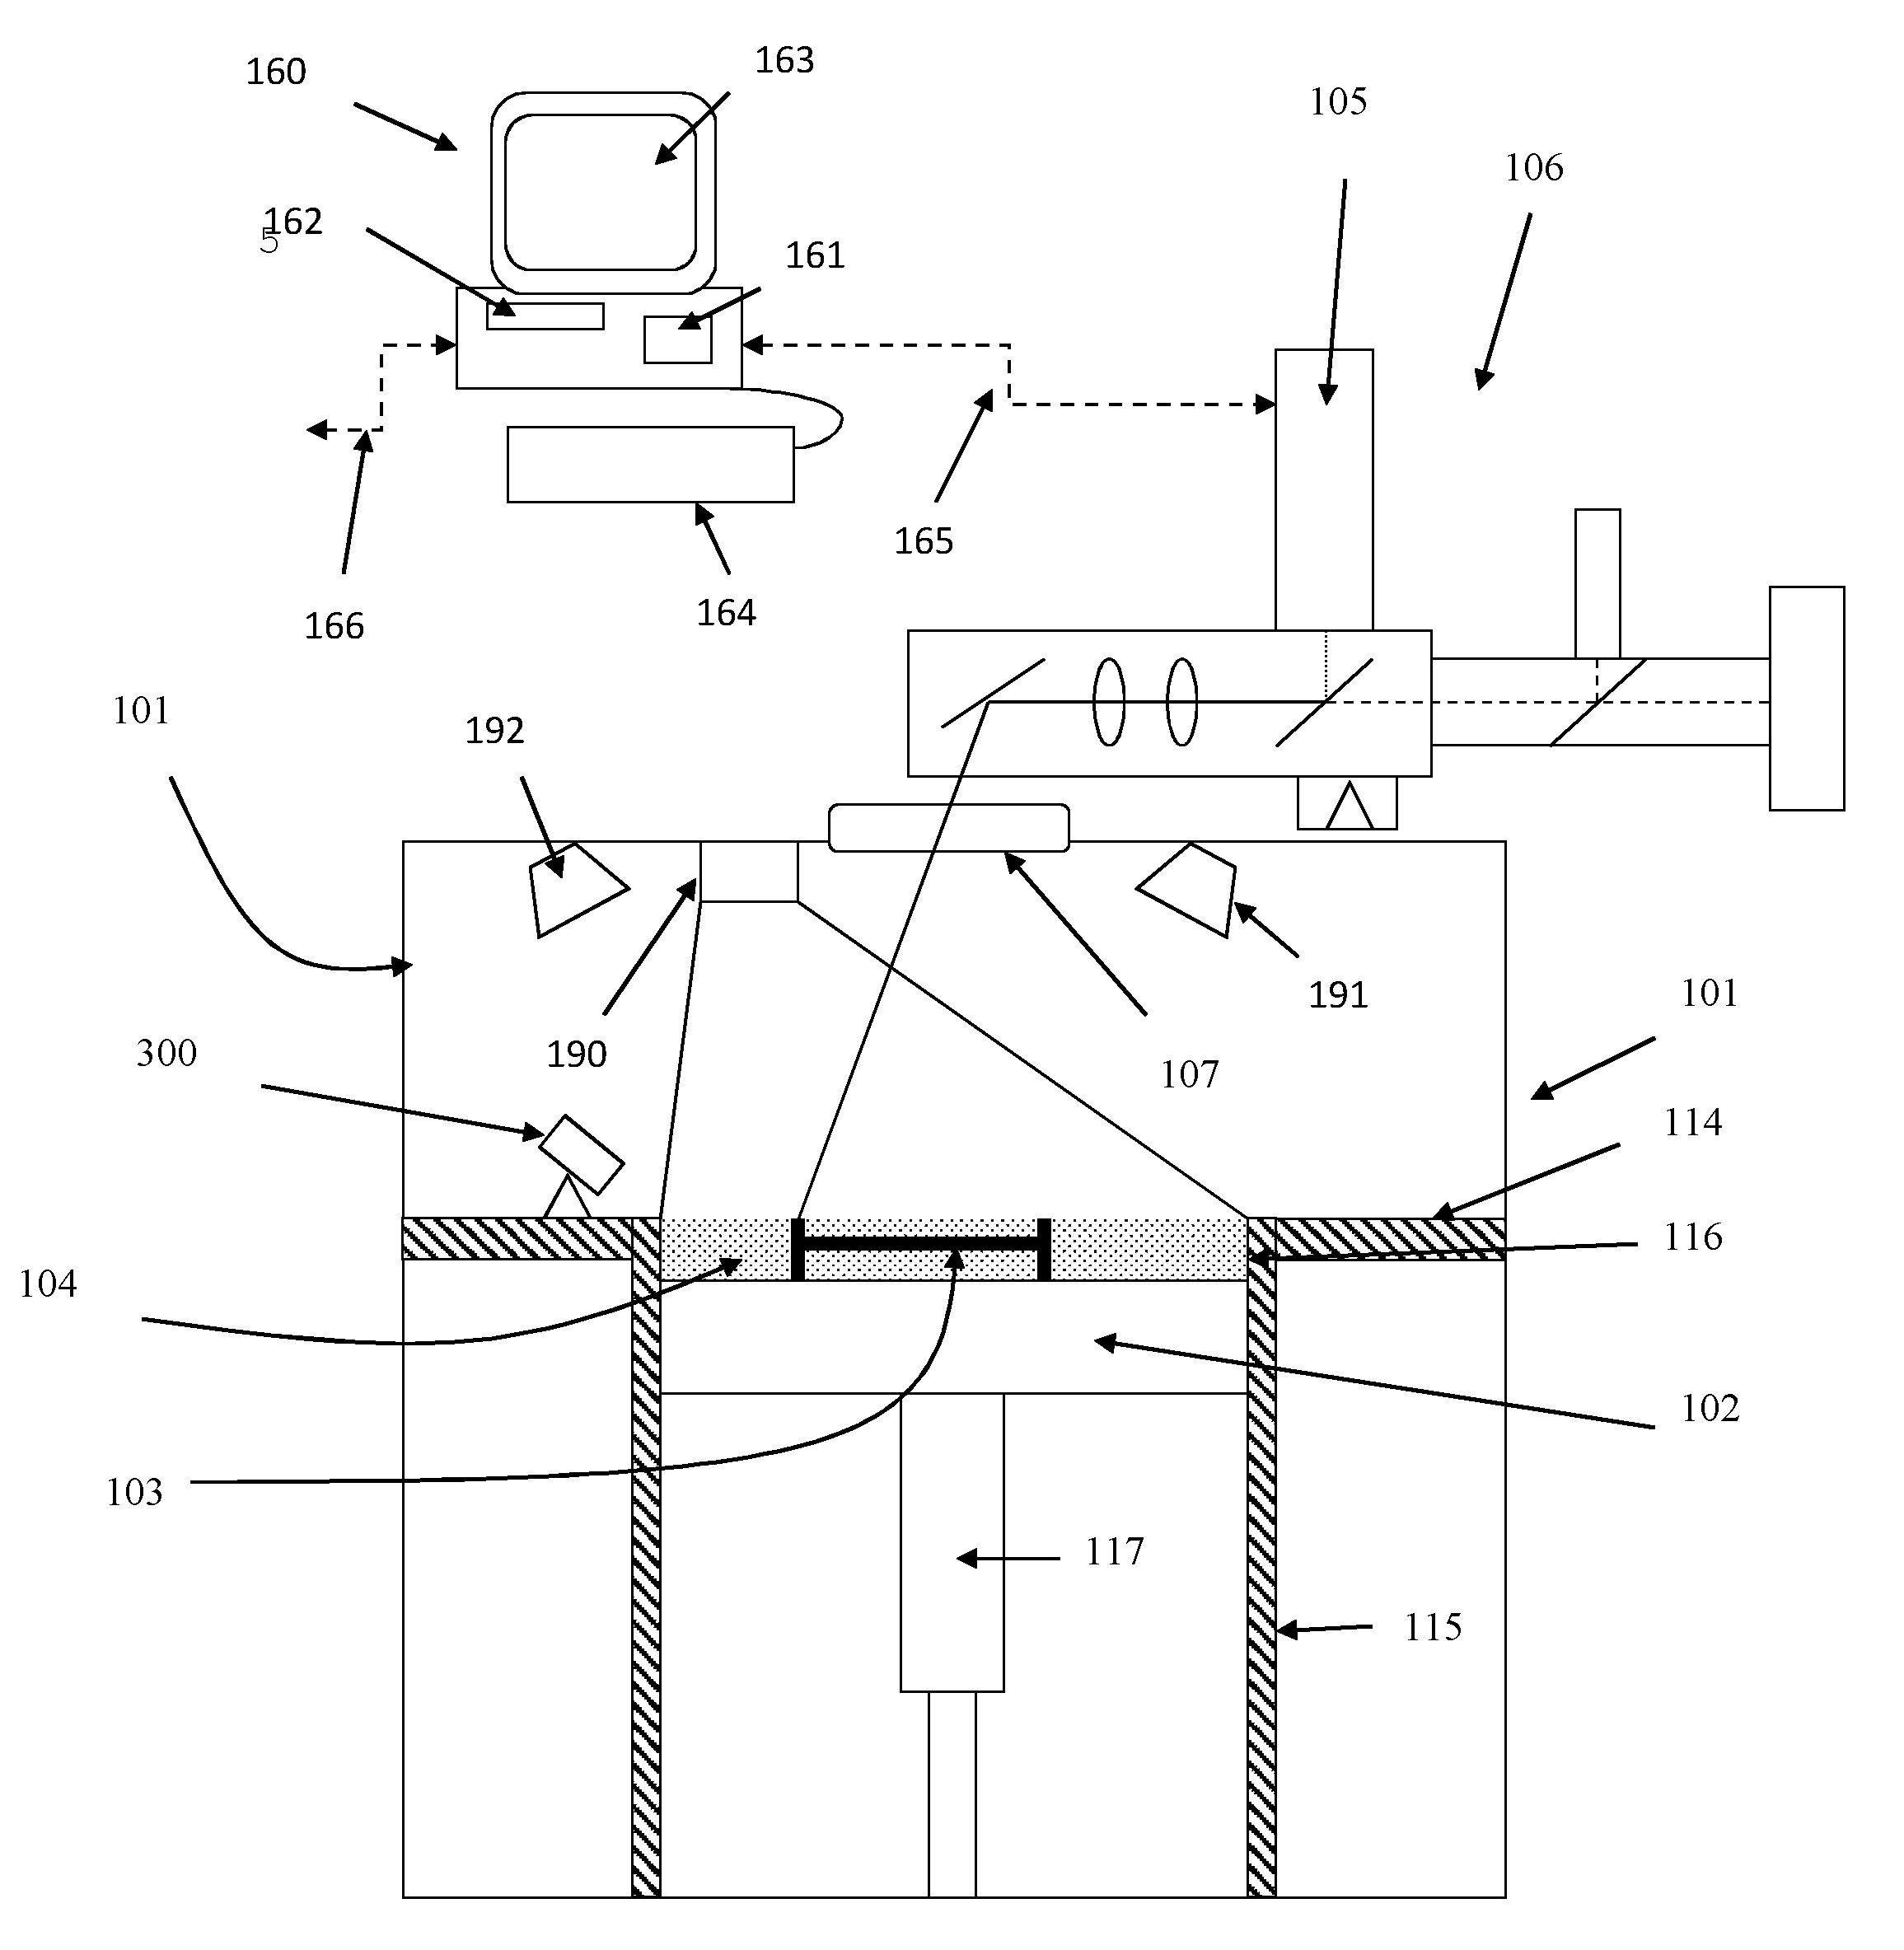 Additive manufacturing apparatus and method